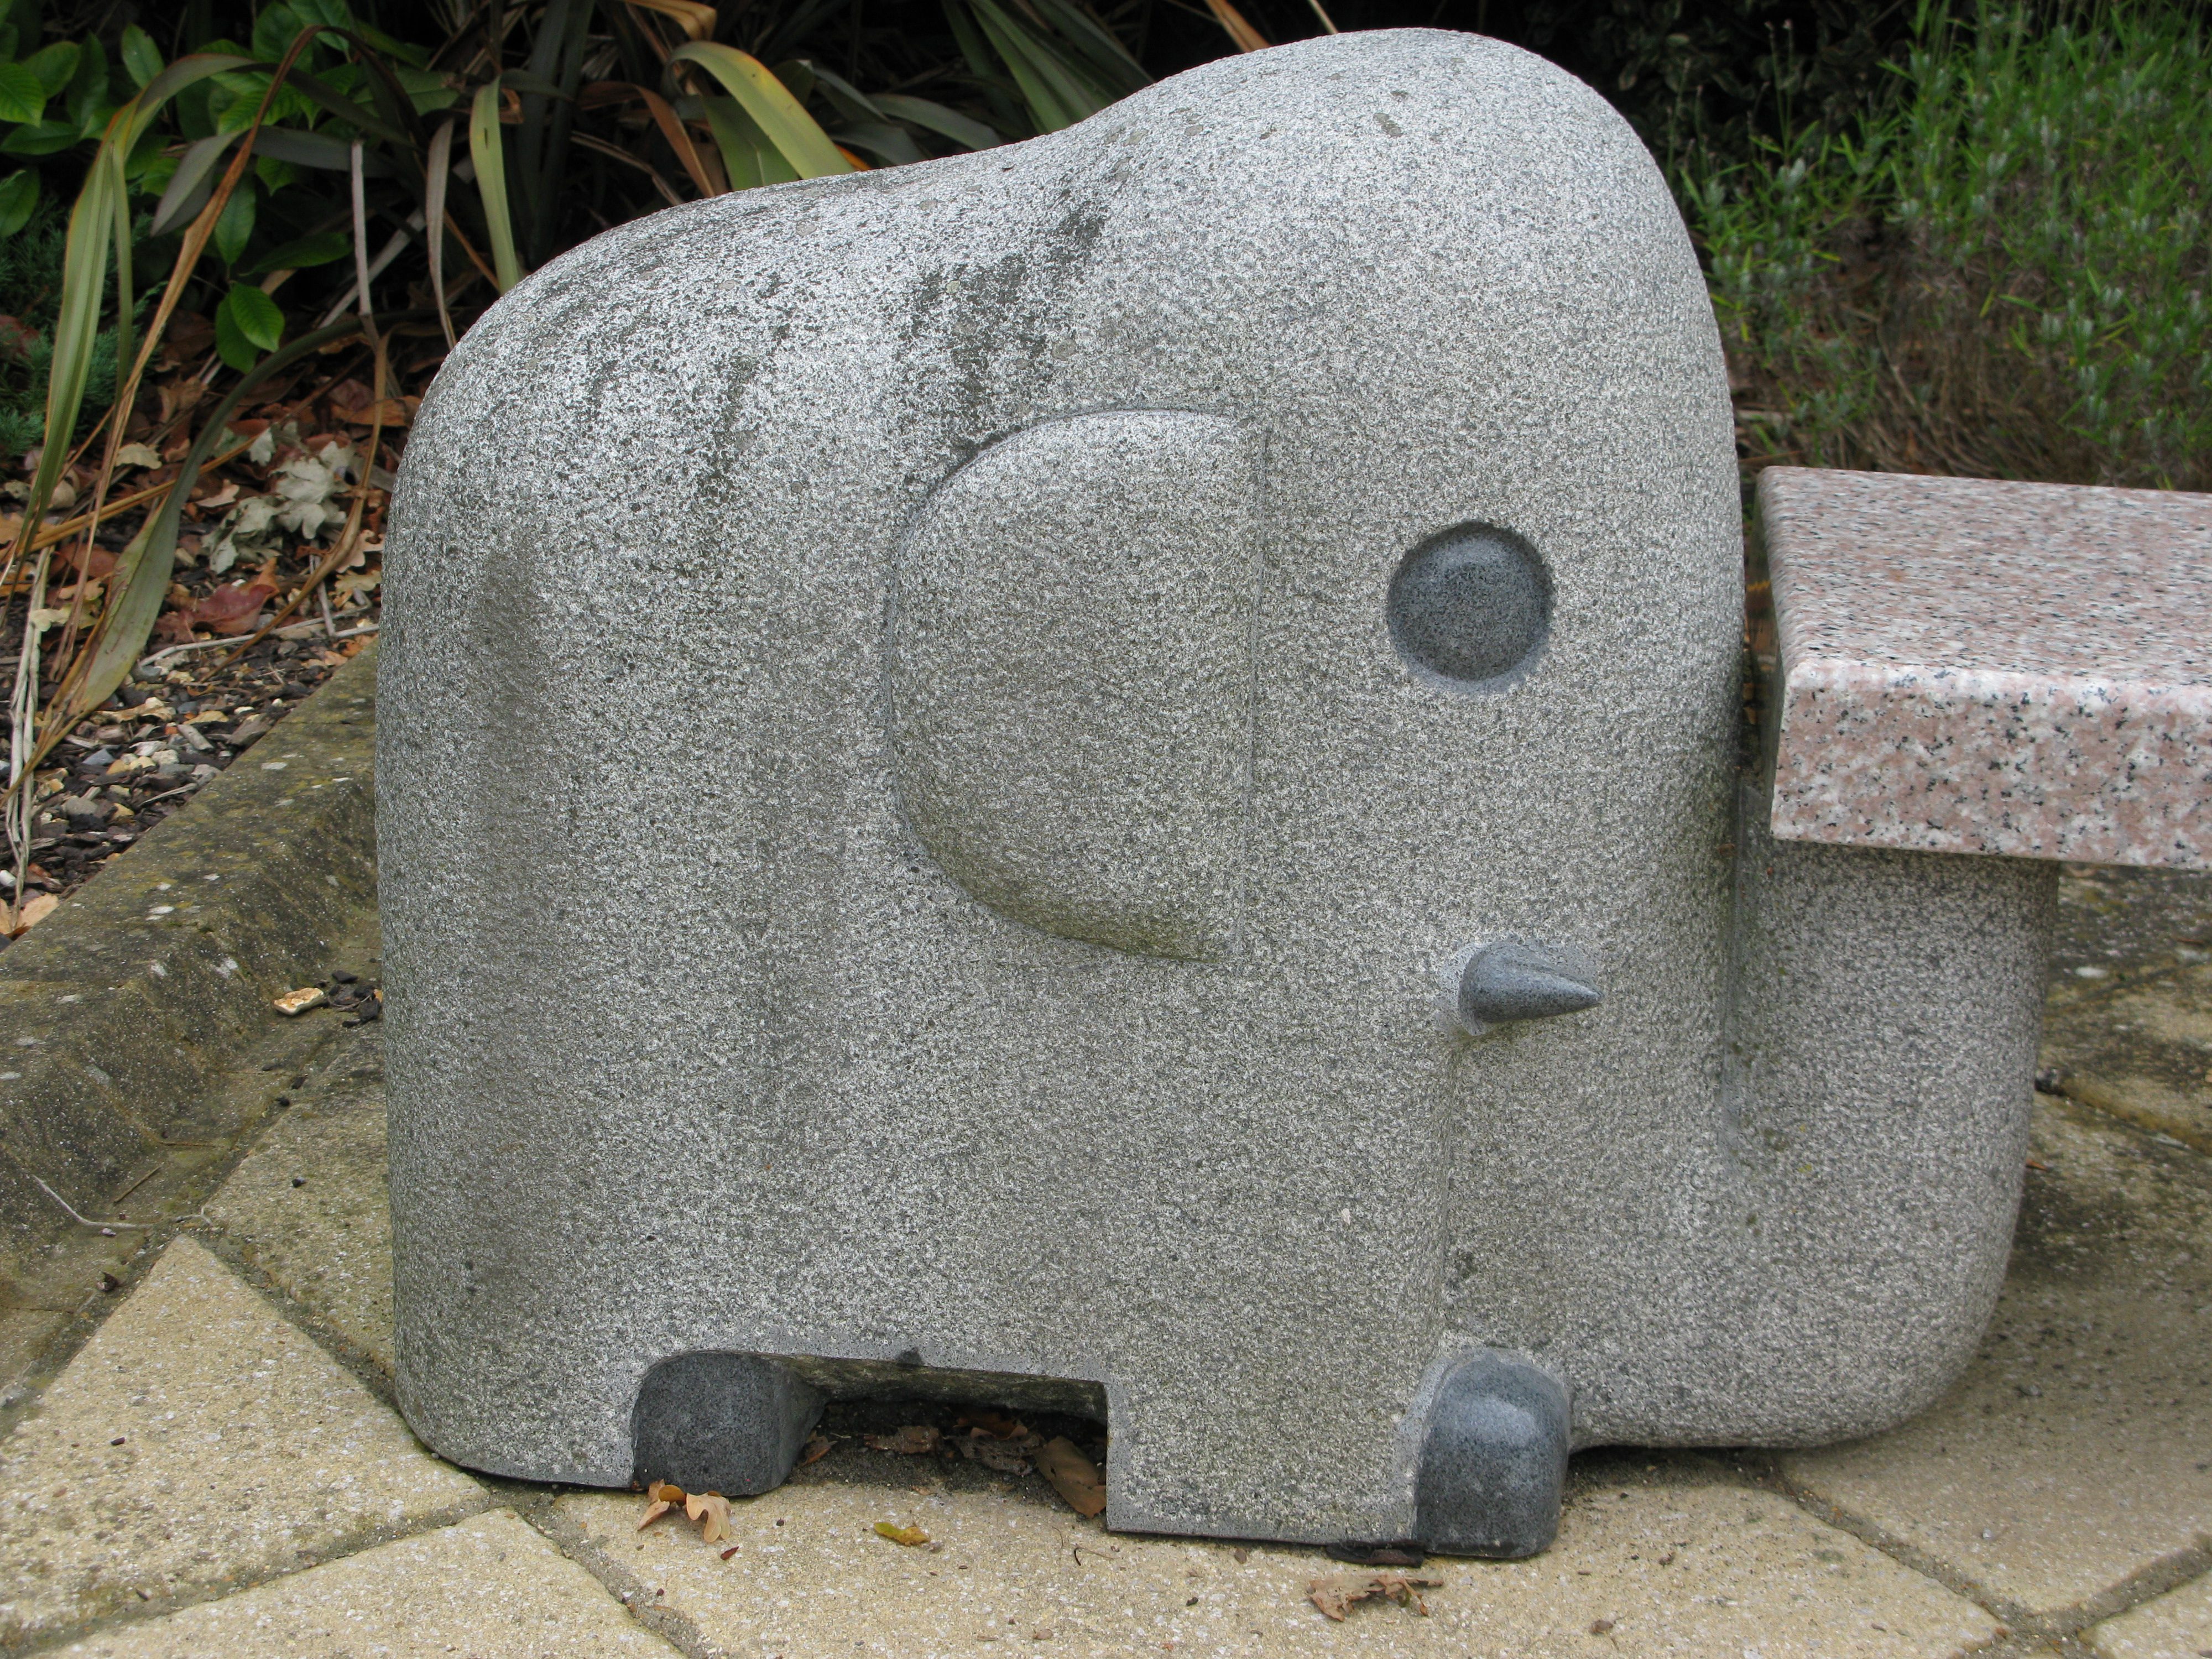 Elephant-shaped seat by the nursery entrance to Services Block.